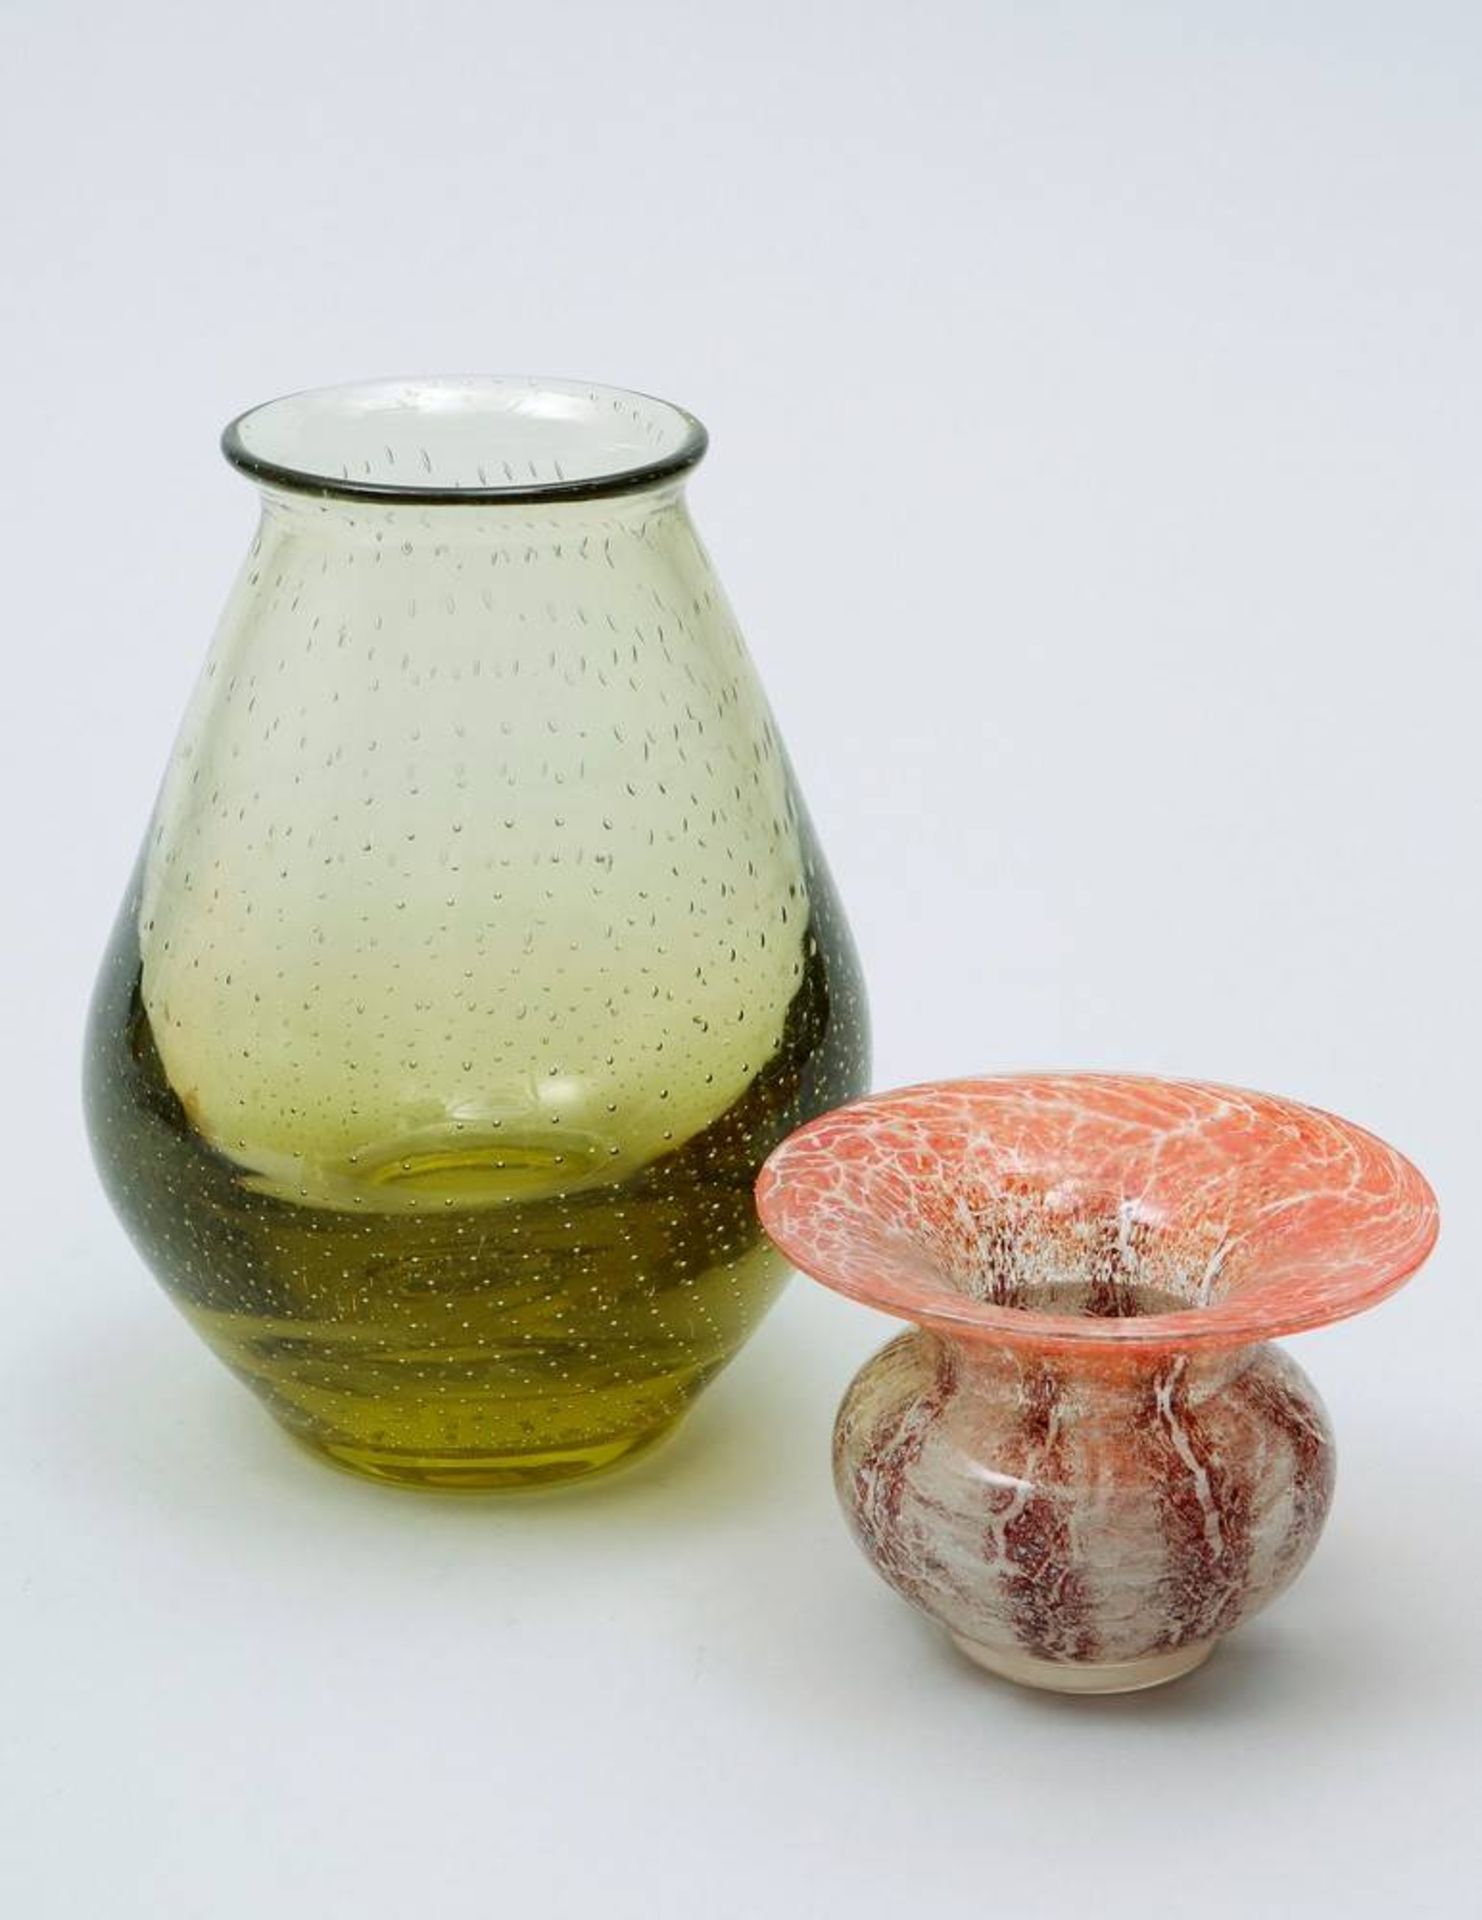 2 Vases german, mid 20th C., 1x WMF Ikora, 1x ovoid shape with bubble inclusions, glass, H: 7-